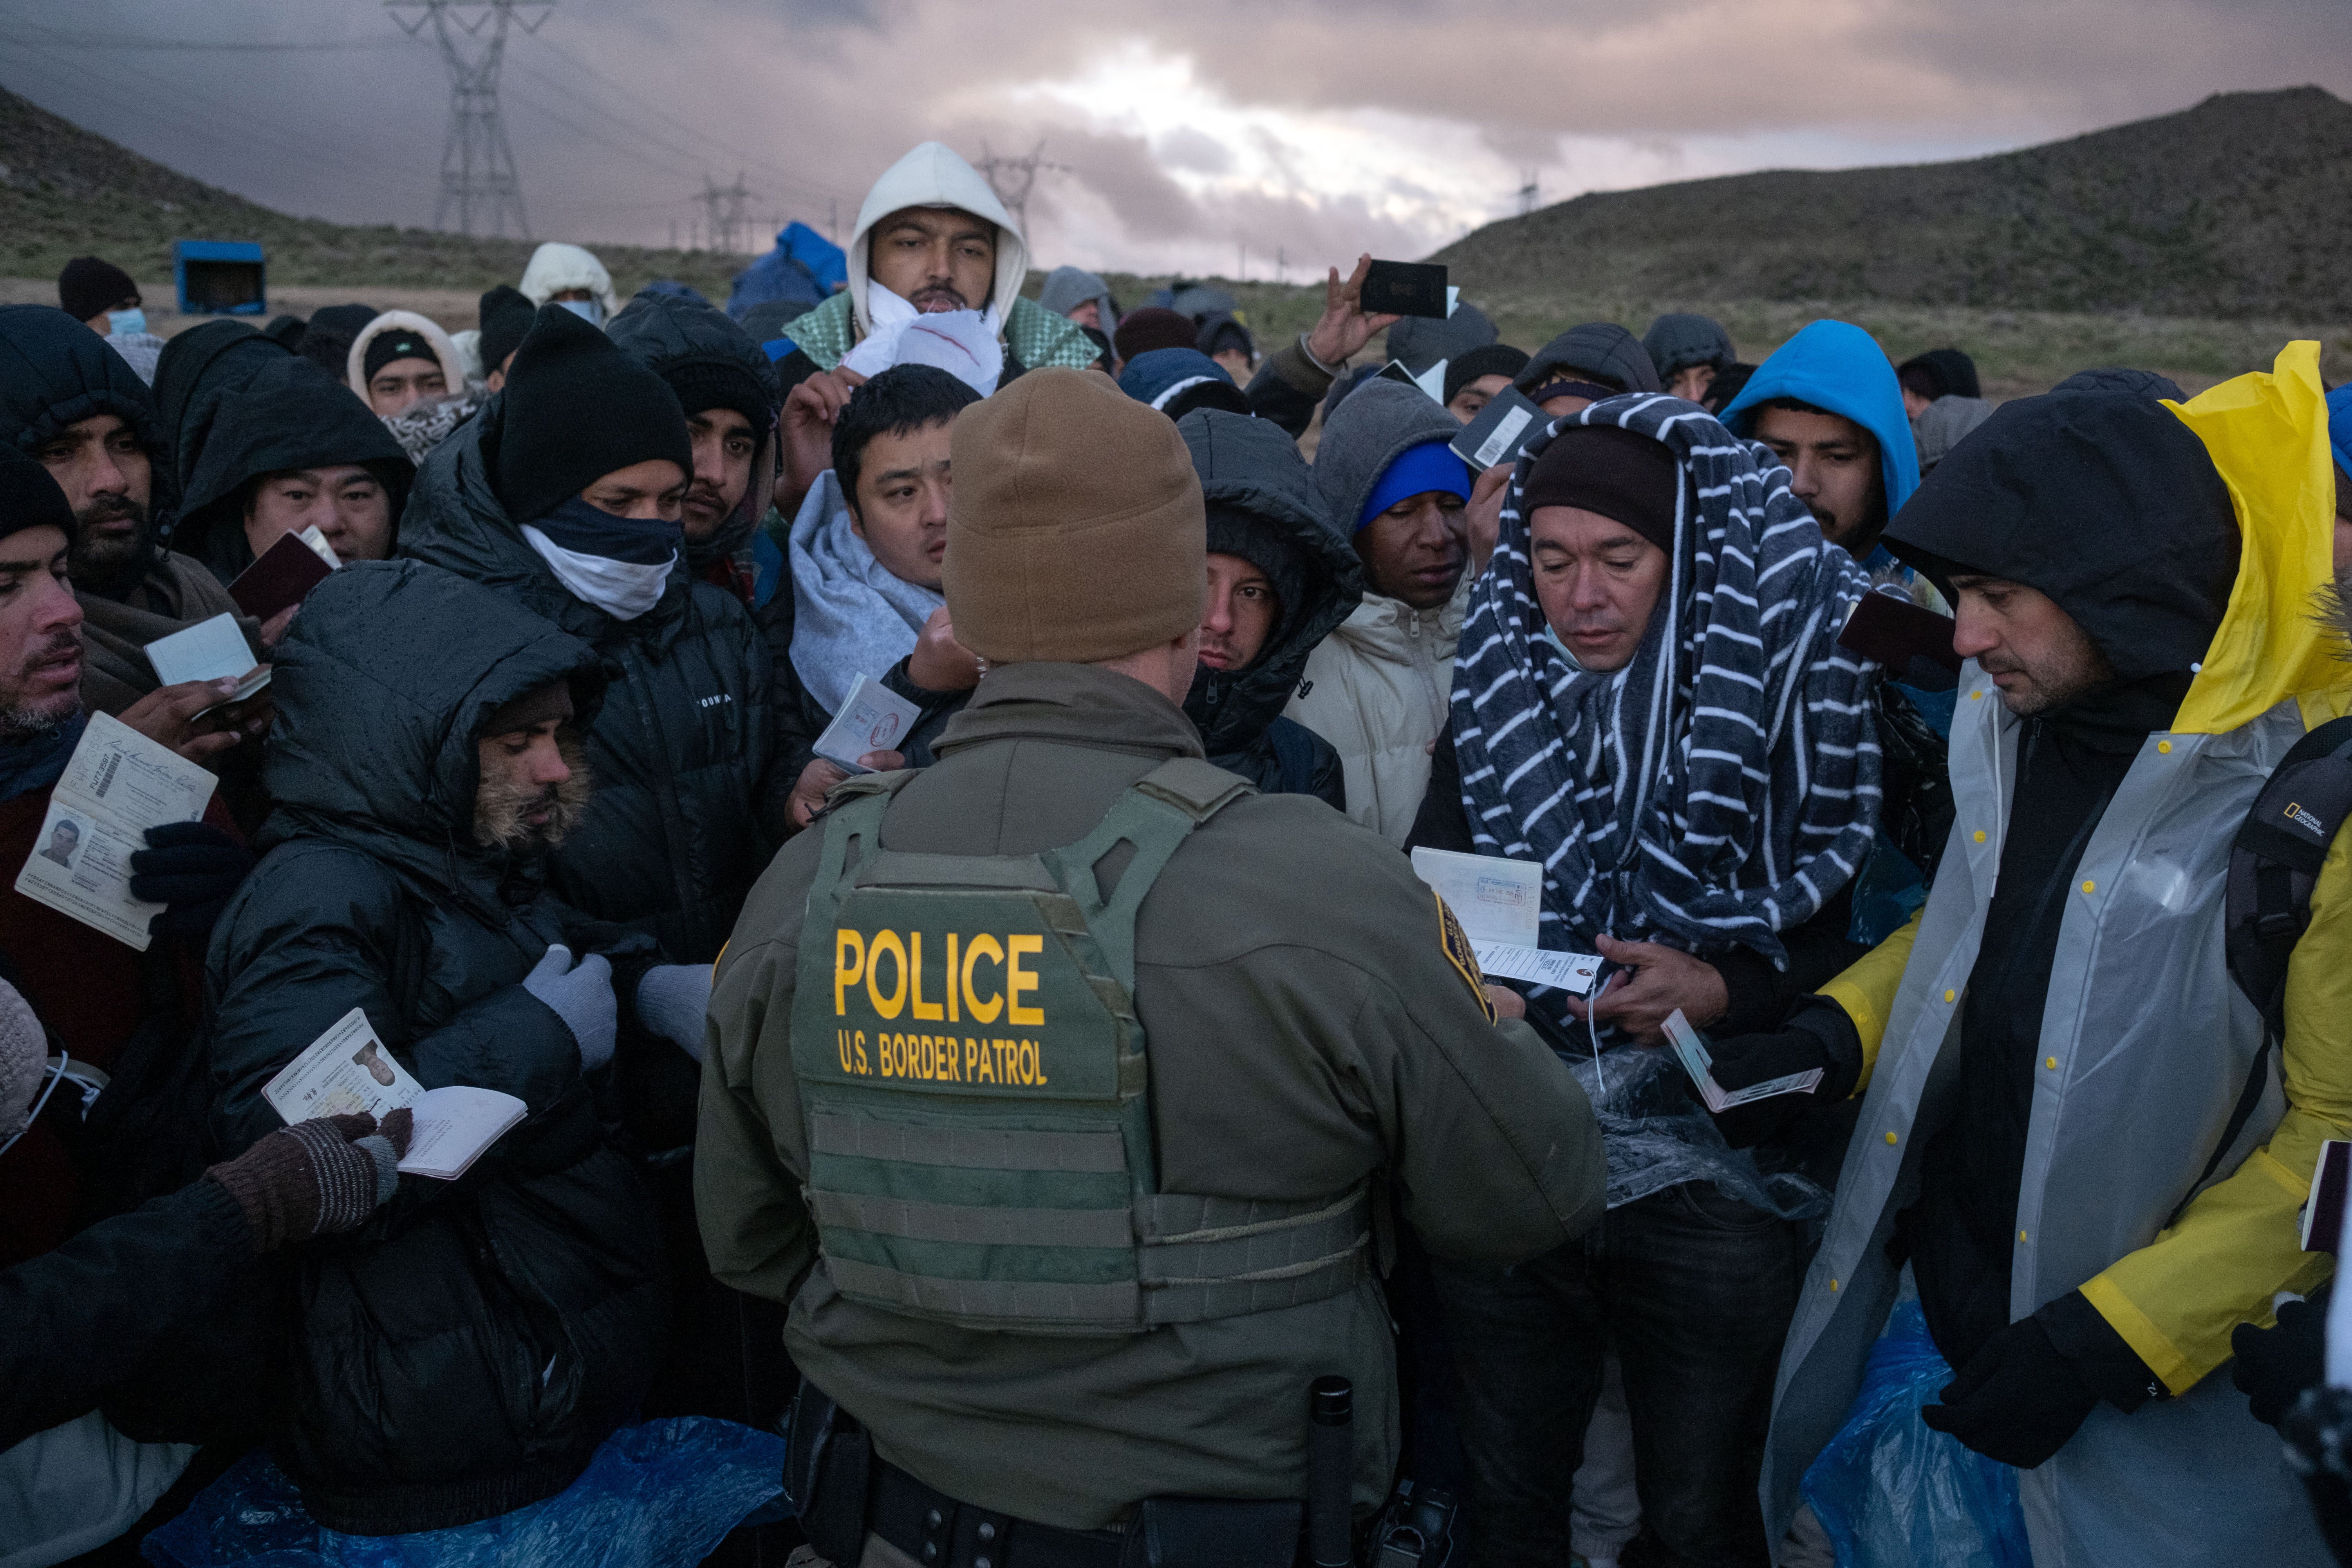 People seeking asylum arrive at the US-Mexico border in California on 2 February